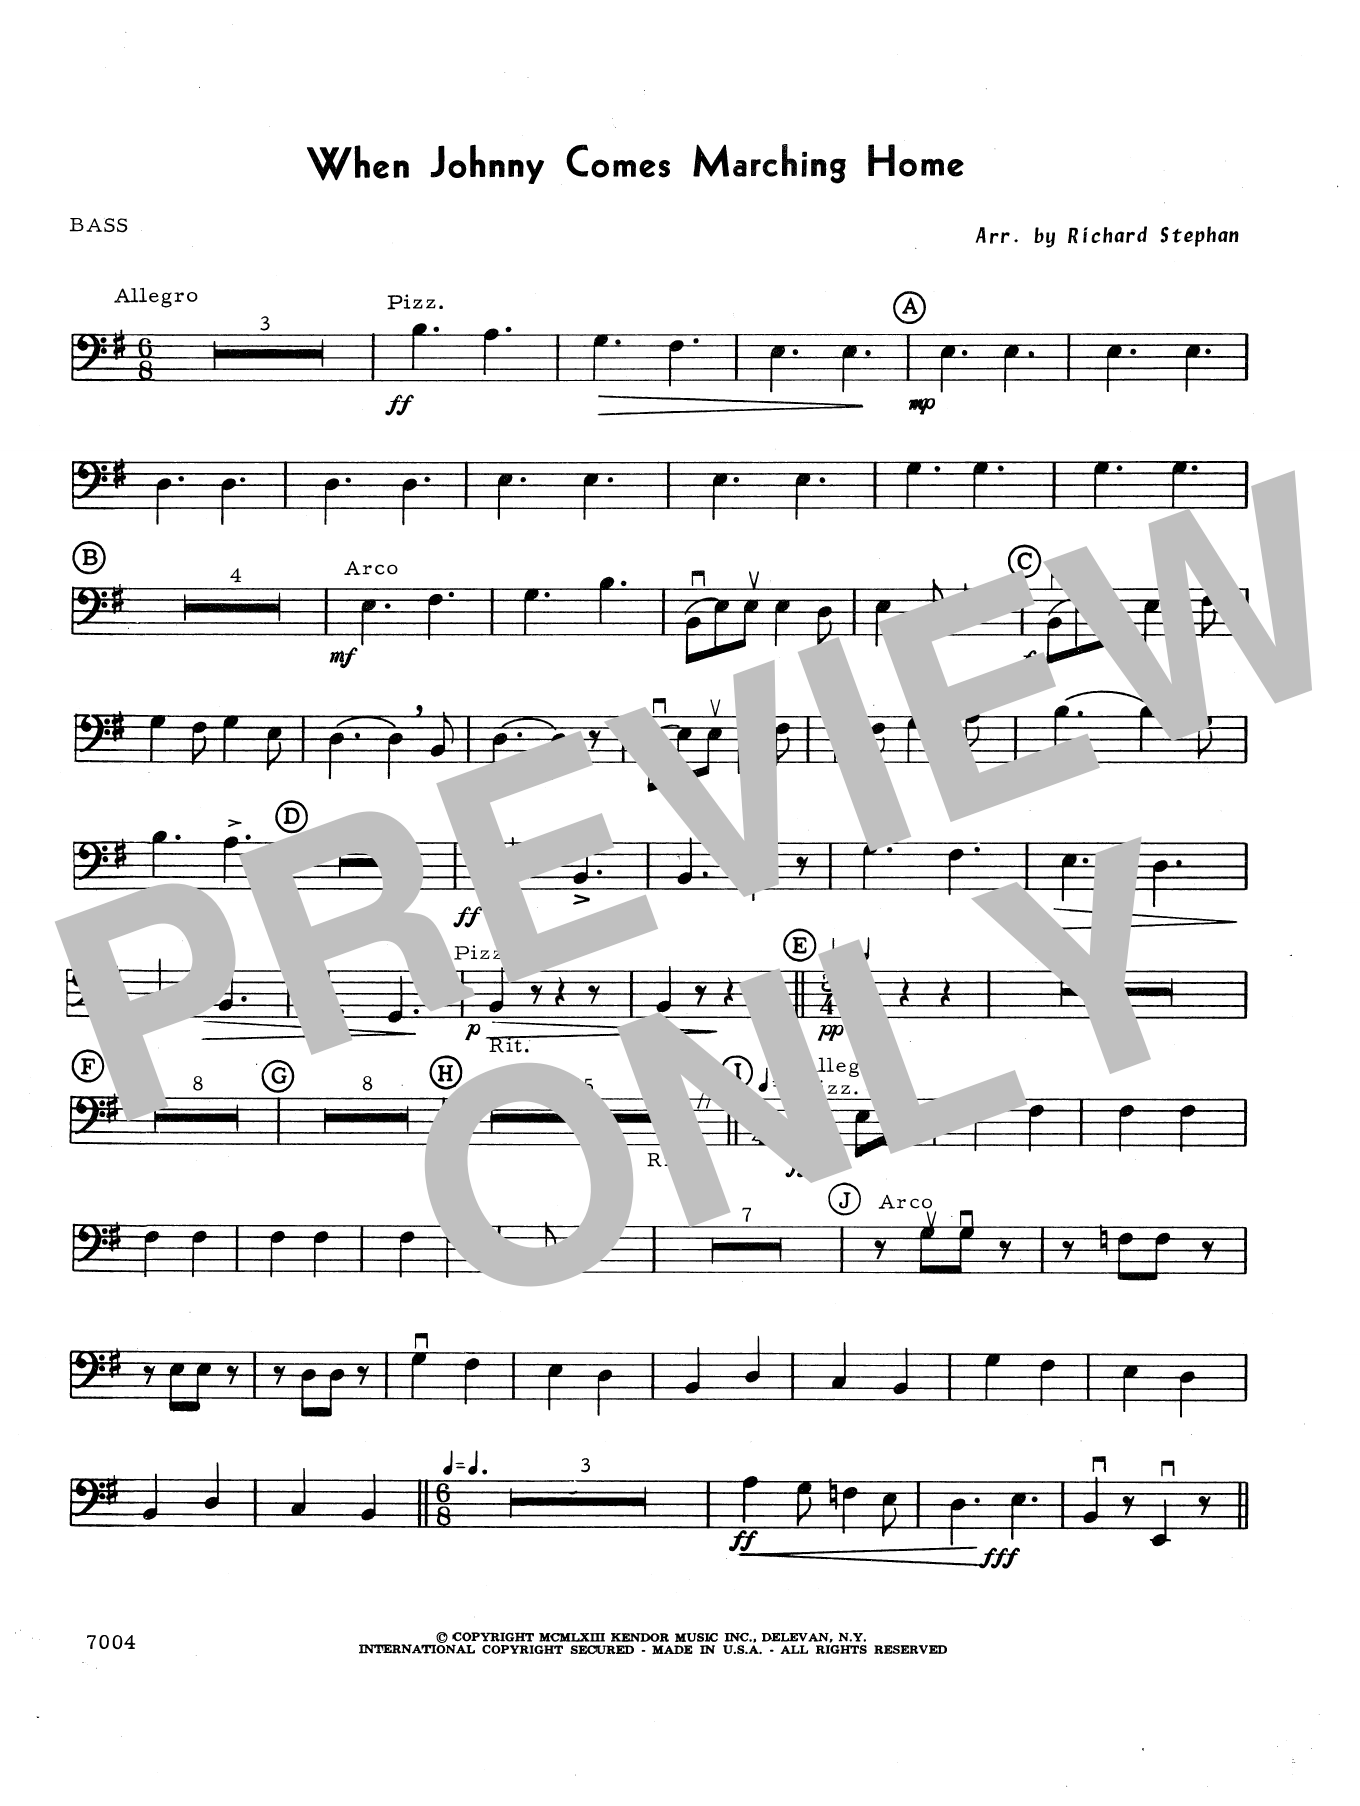 Download Richard Stephan When Johnny Comes Marching Home - Bass Sheet Music